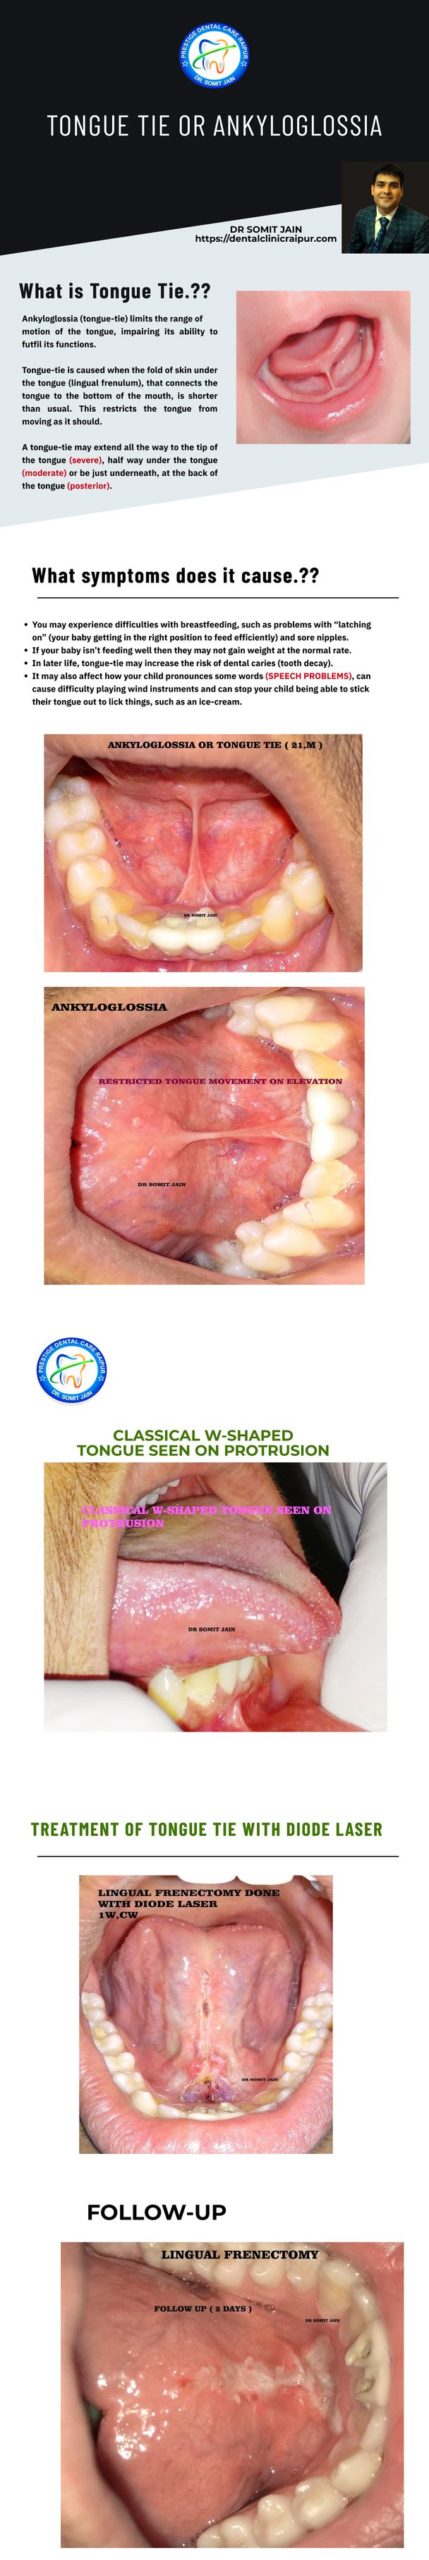 tongue-tie or Ankyloglossia Infographic